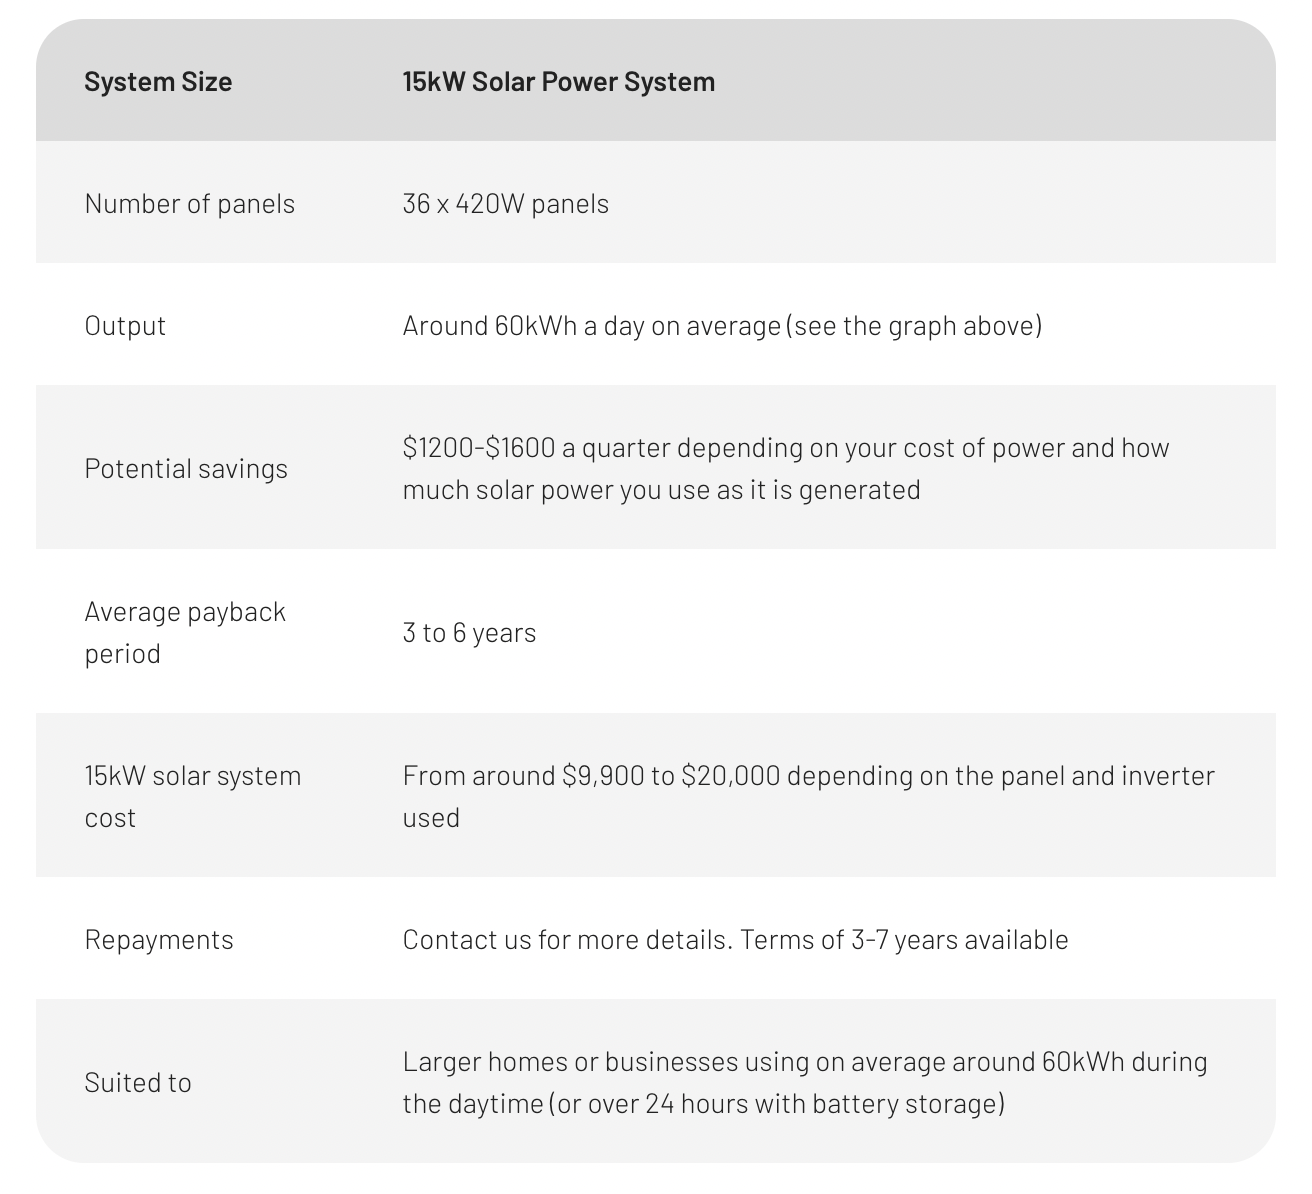 15kW solar system key numbers and information table